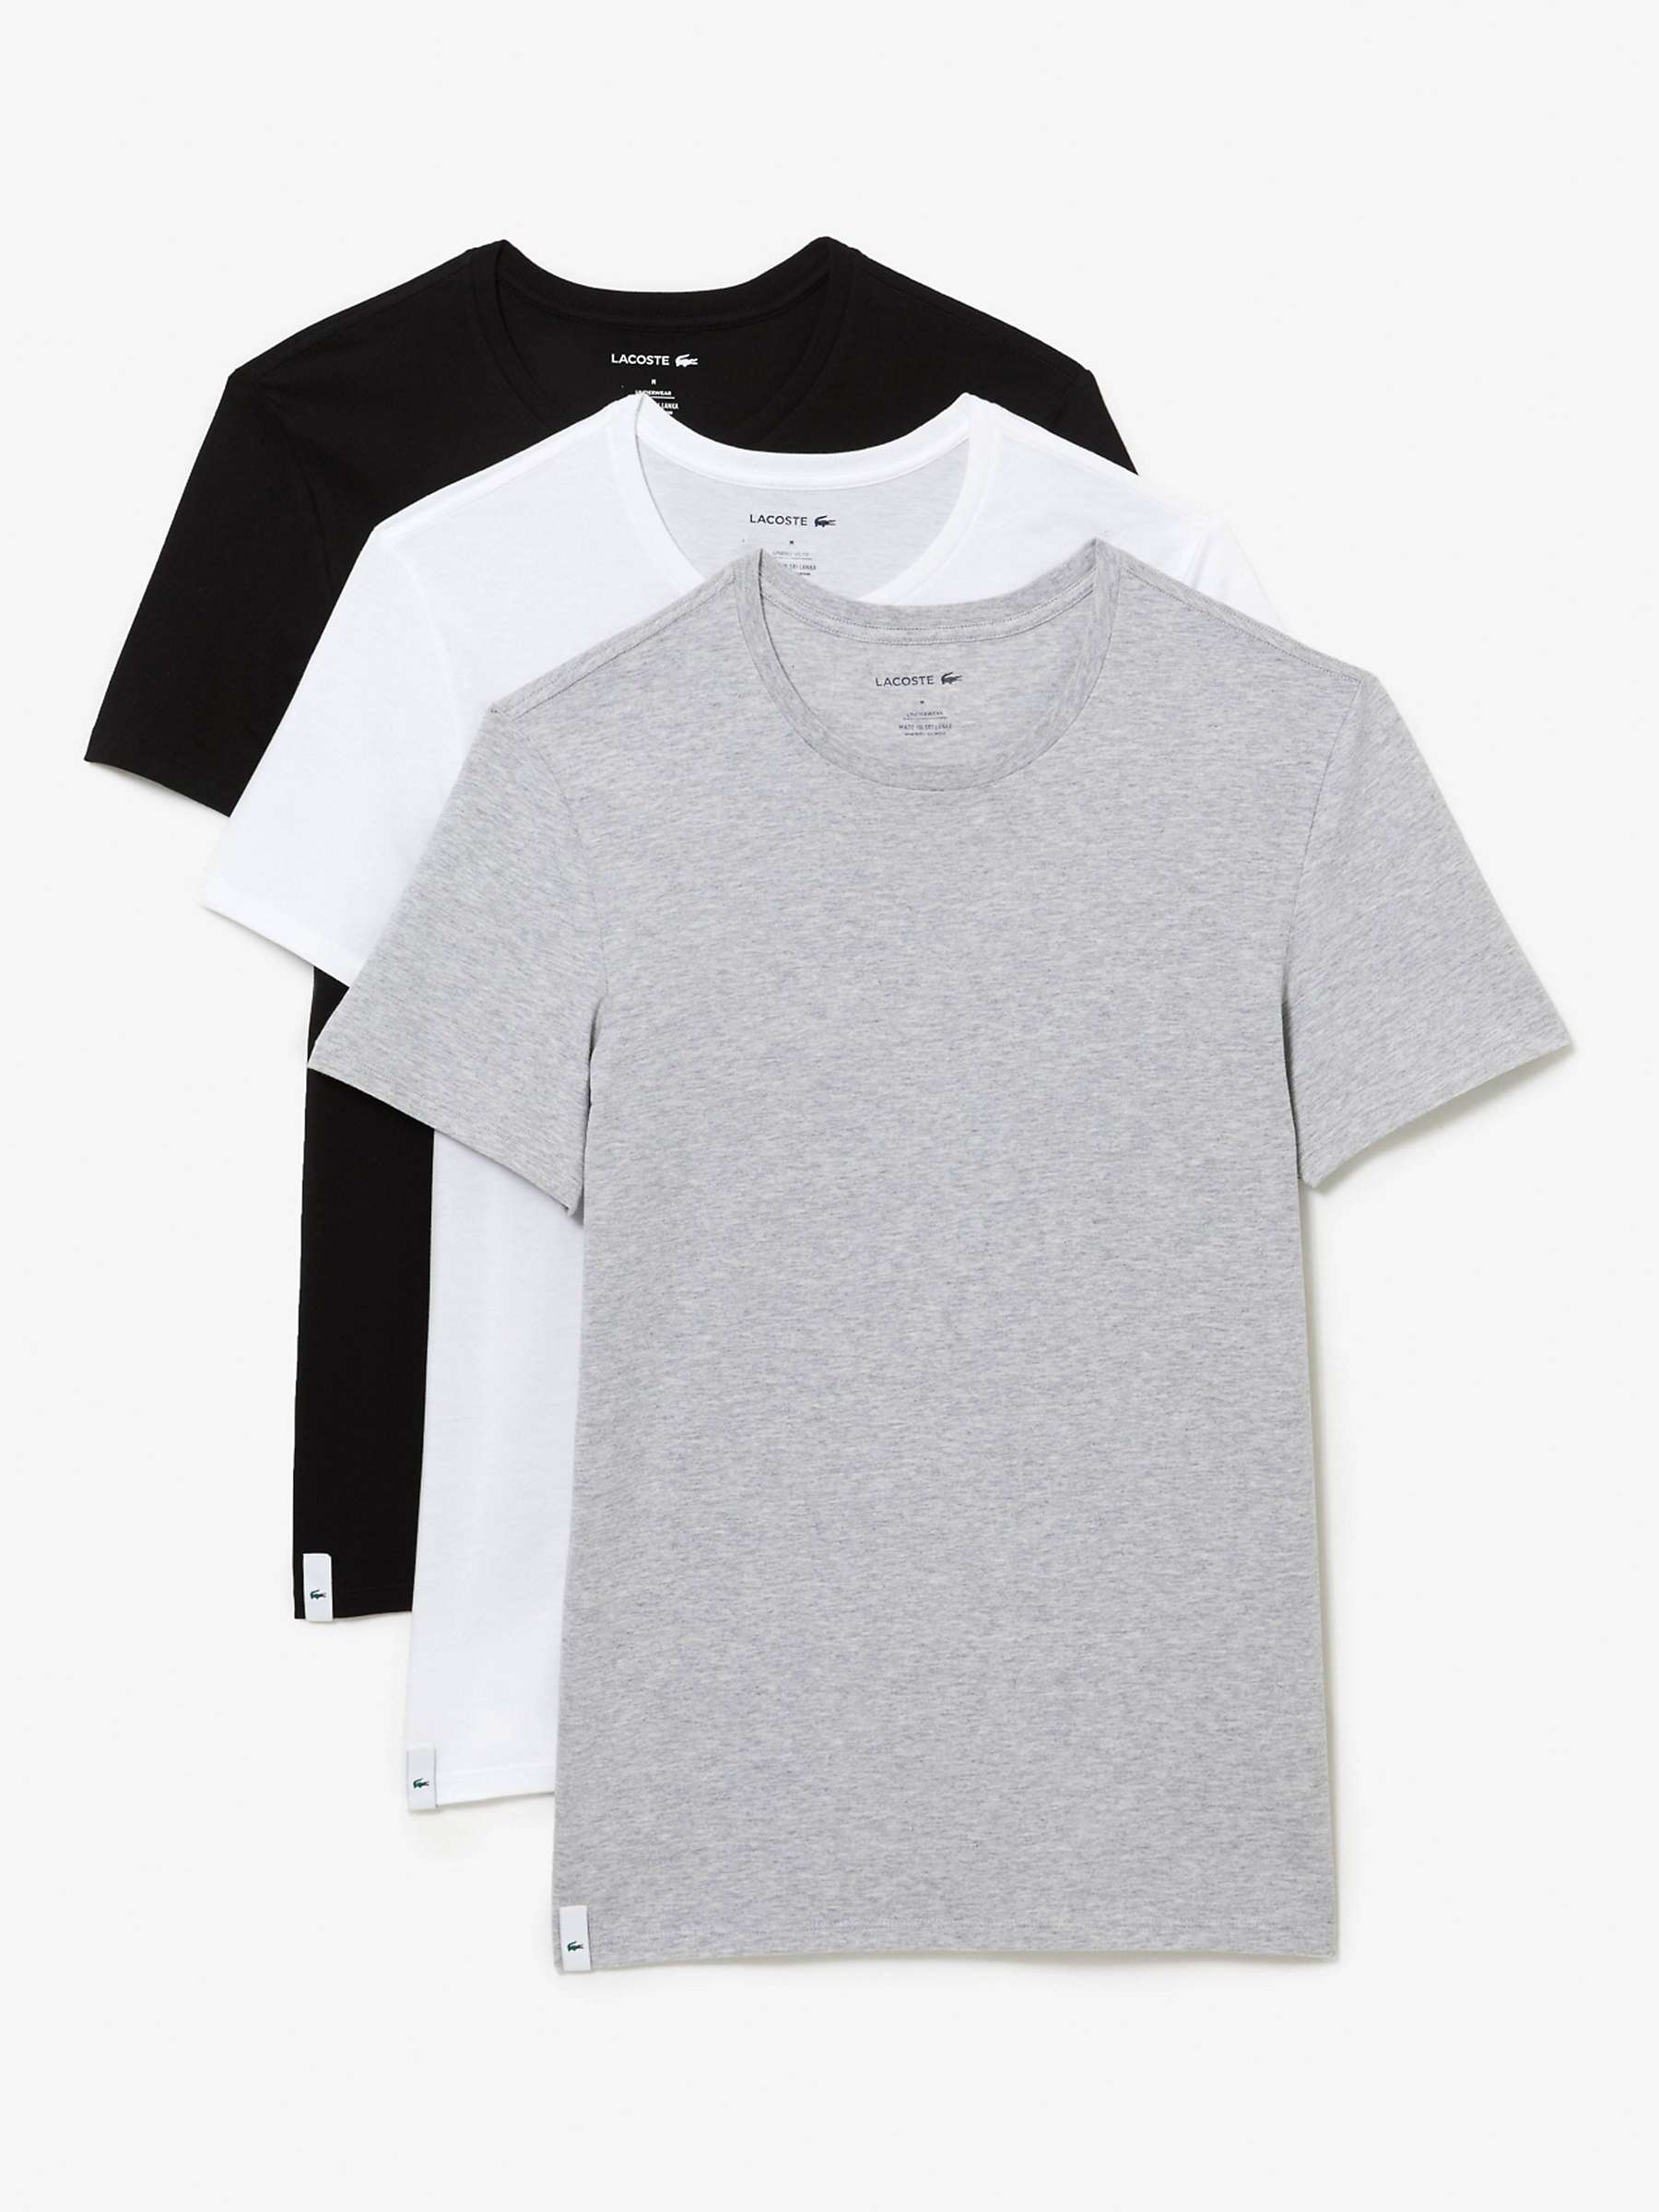 Buy Lacoste Crew Neck Slim T-Shirts, Pack of 3 Online at johnlewis.com